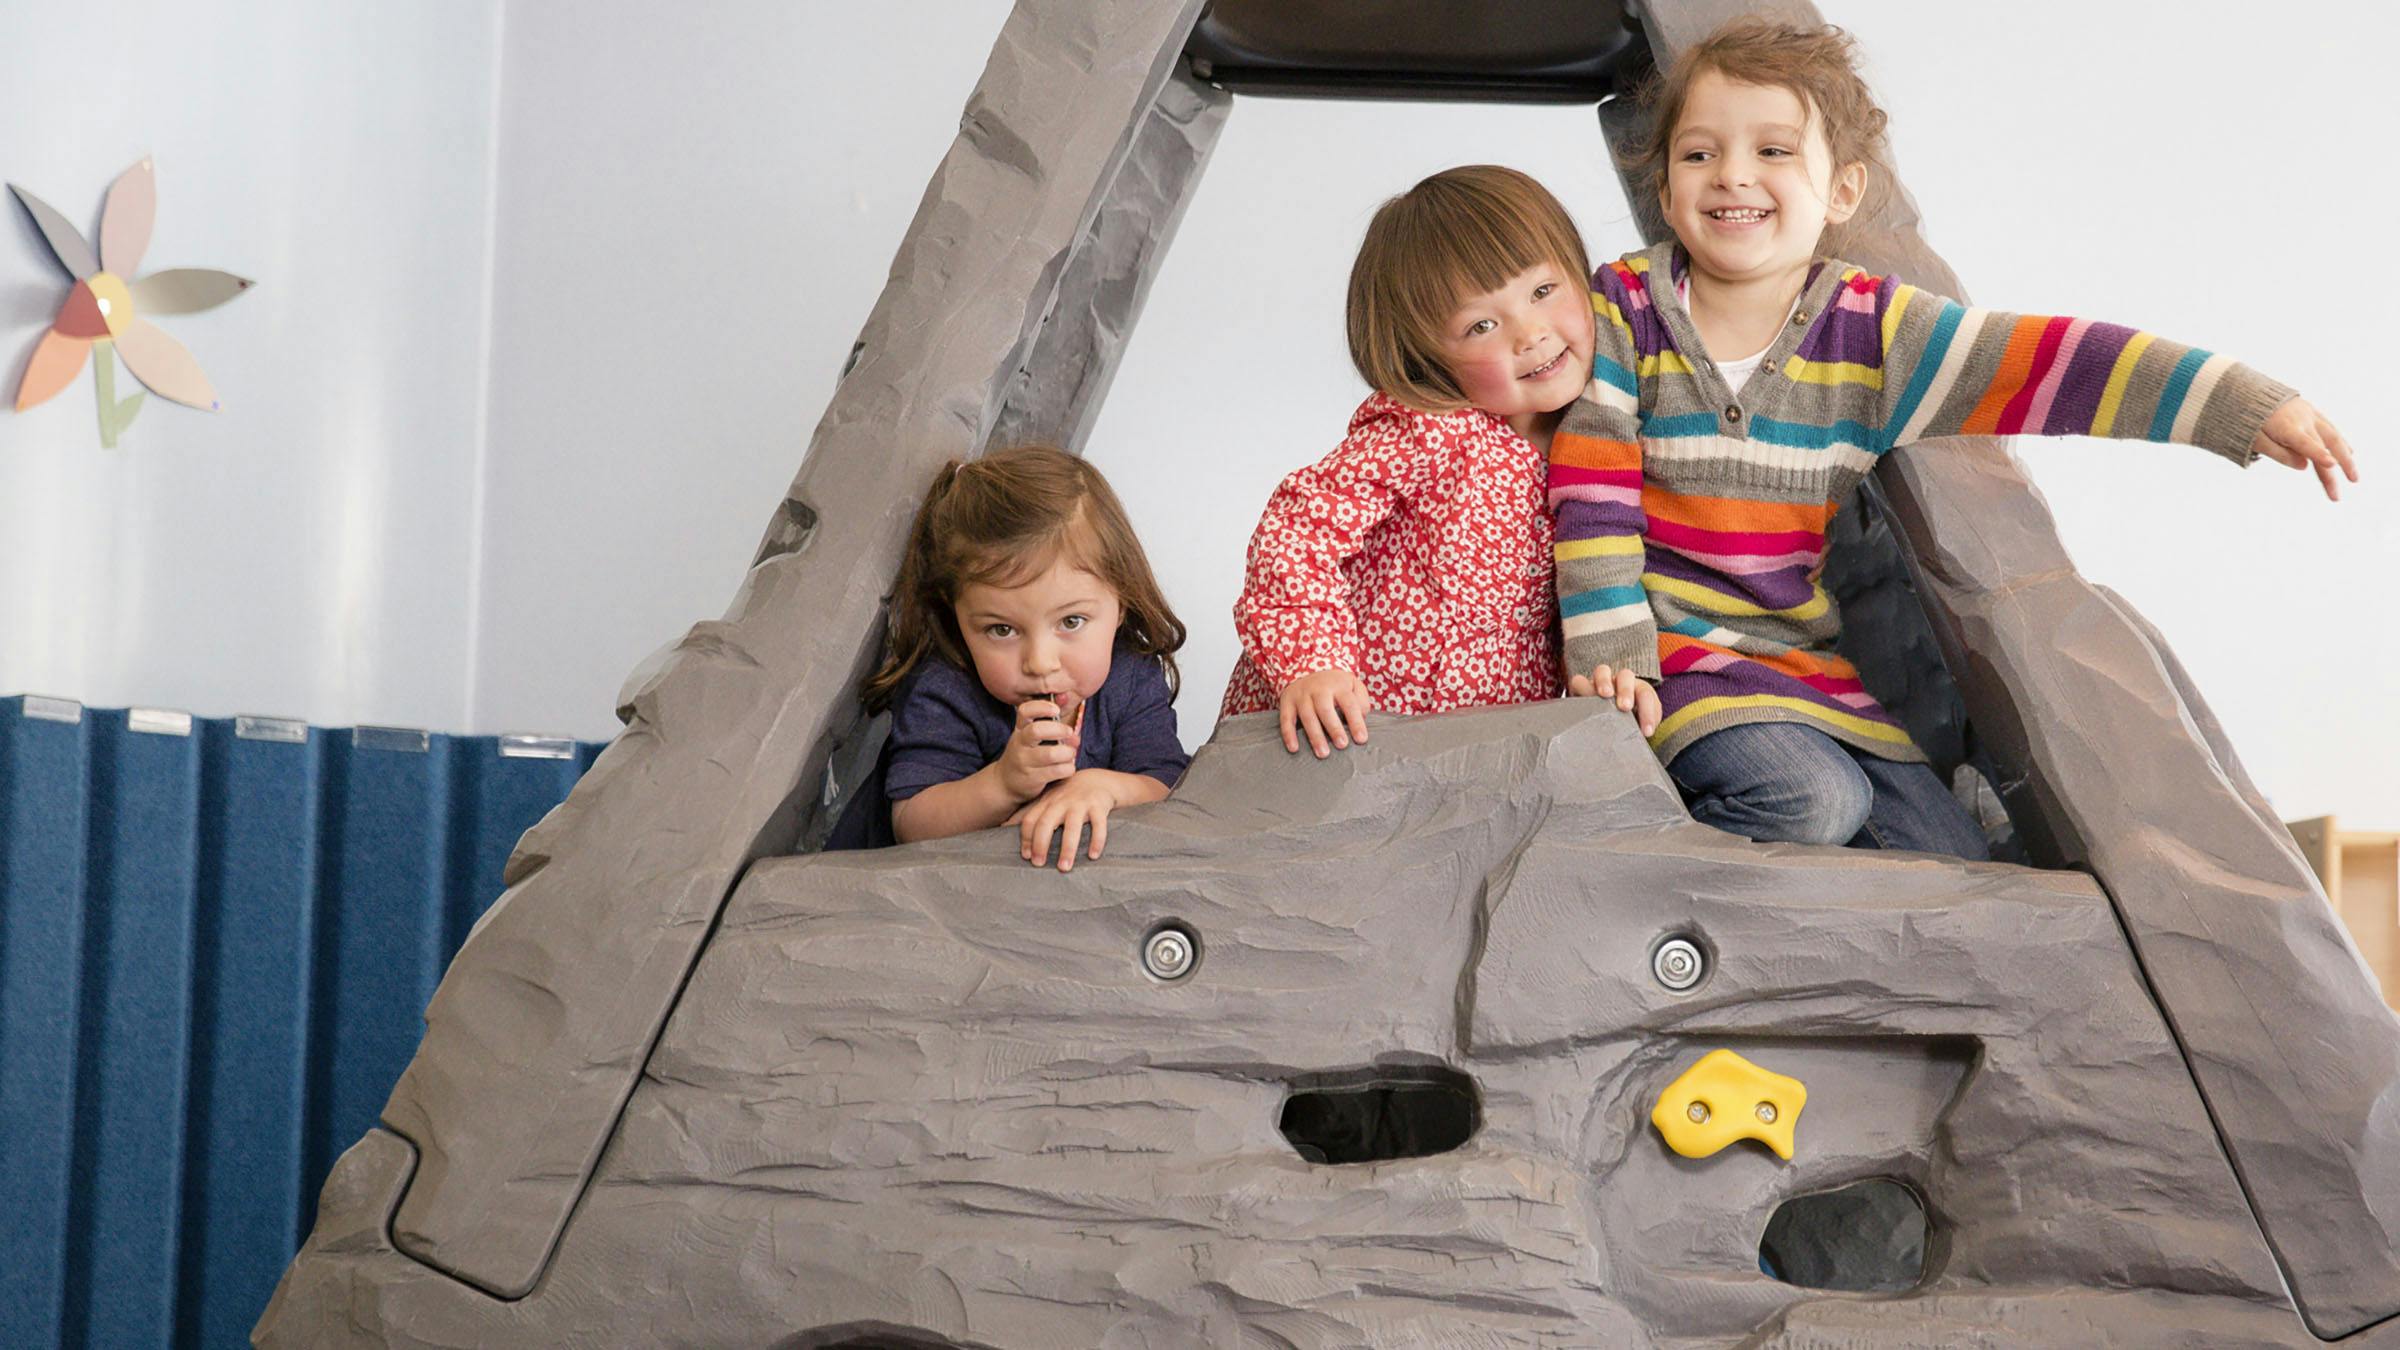 Group of three kids playing at daycare